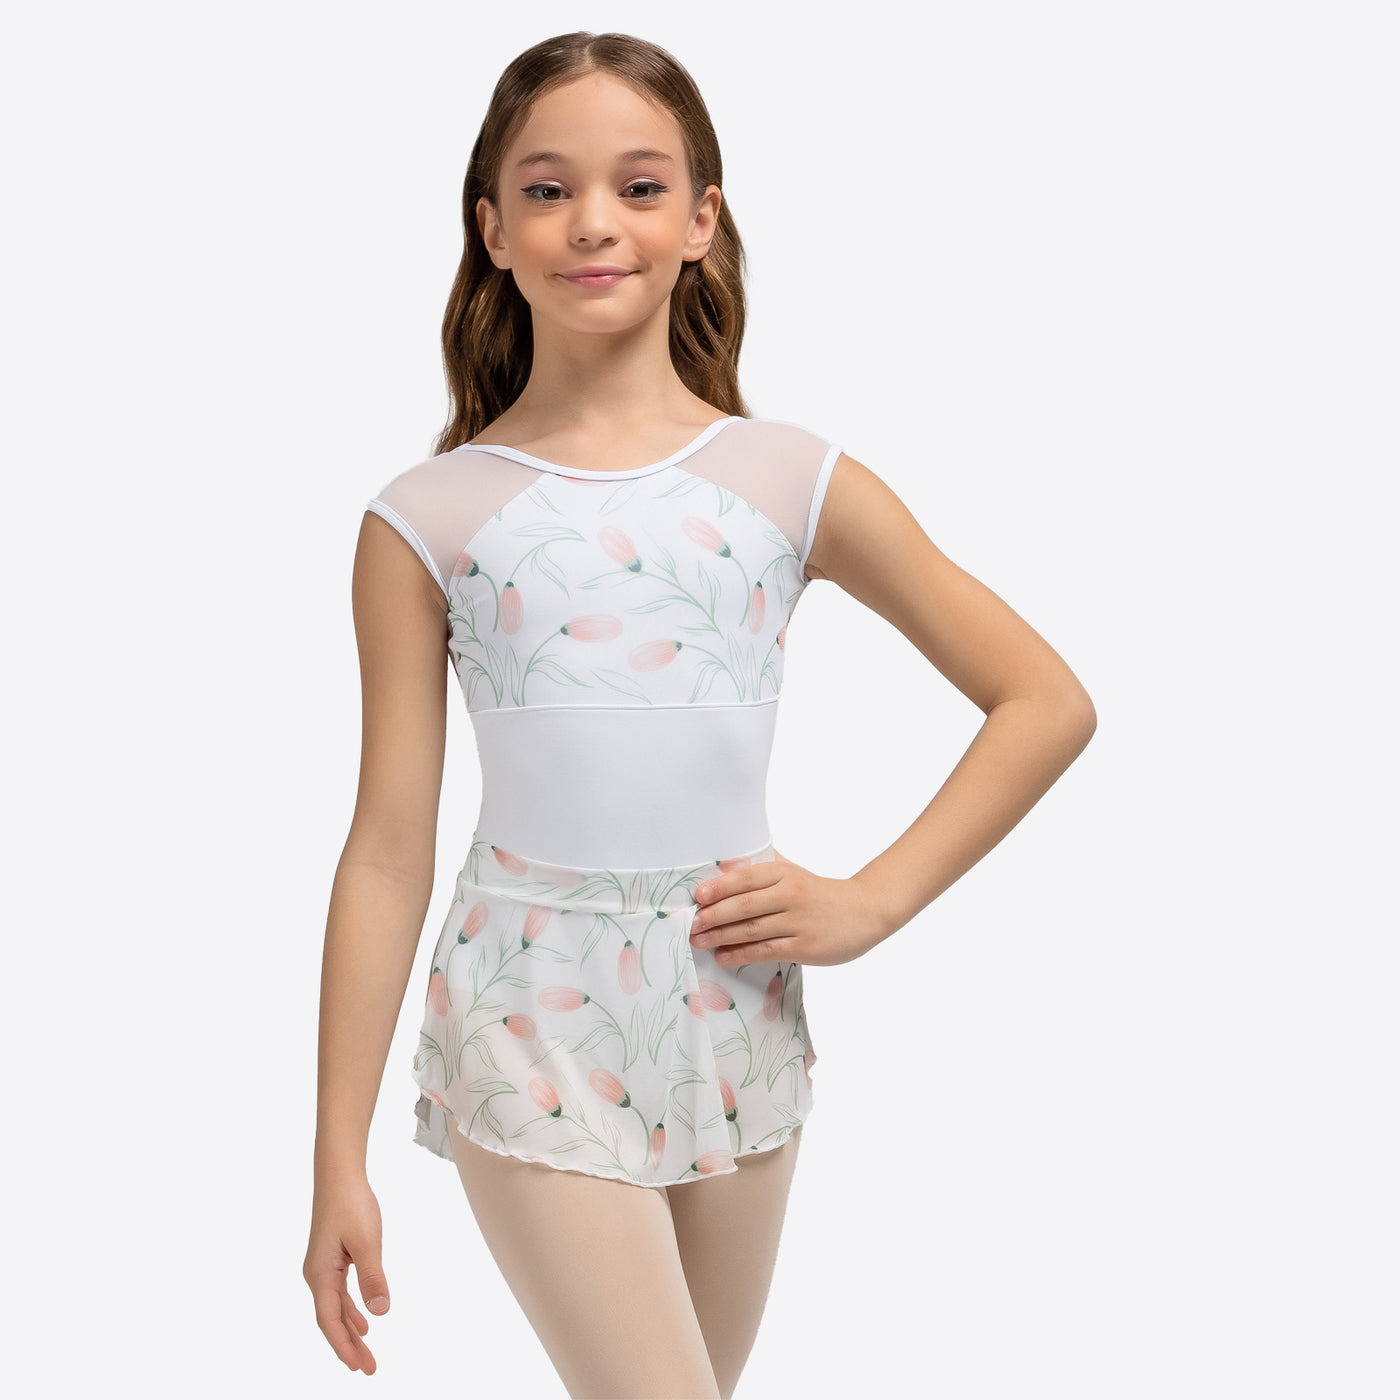 BE YOU® Lupica Kid's Skirt - L2299